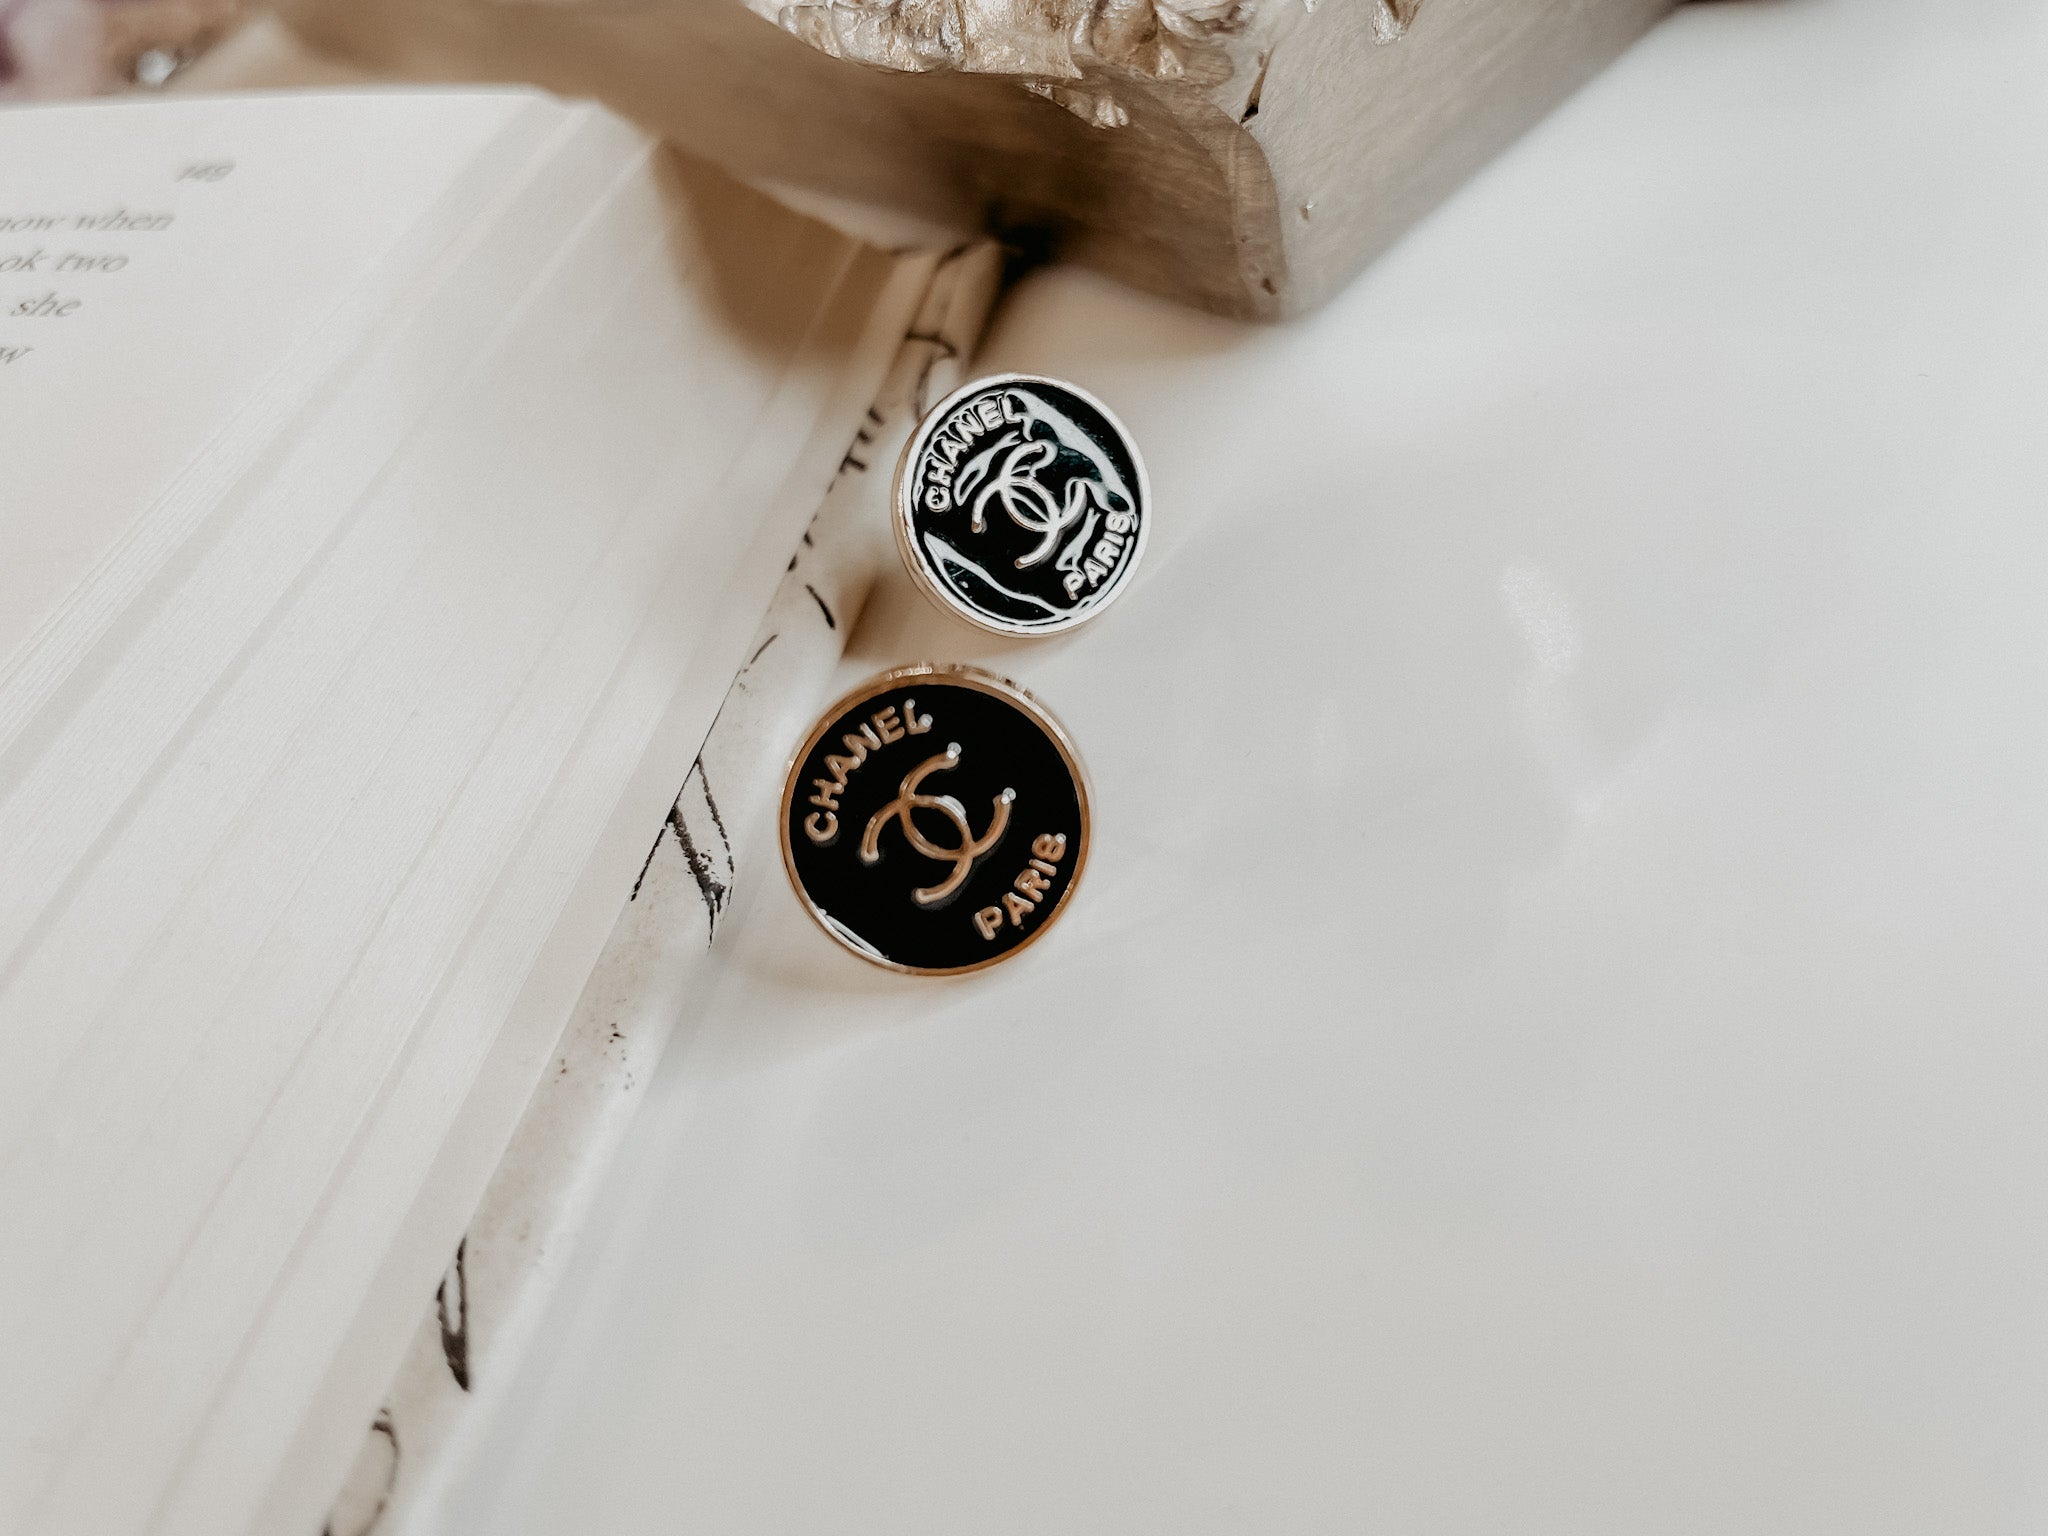 Vintage Chanel buttons made into earrings studs – Noah&Co Jewelry